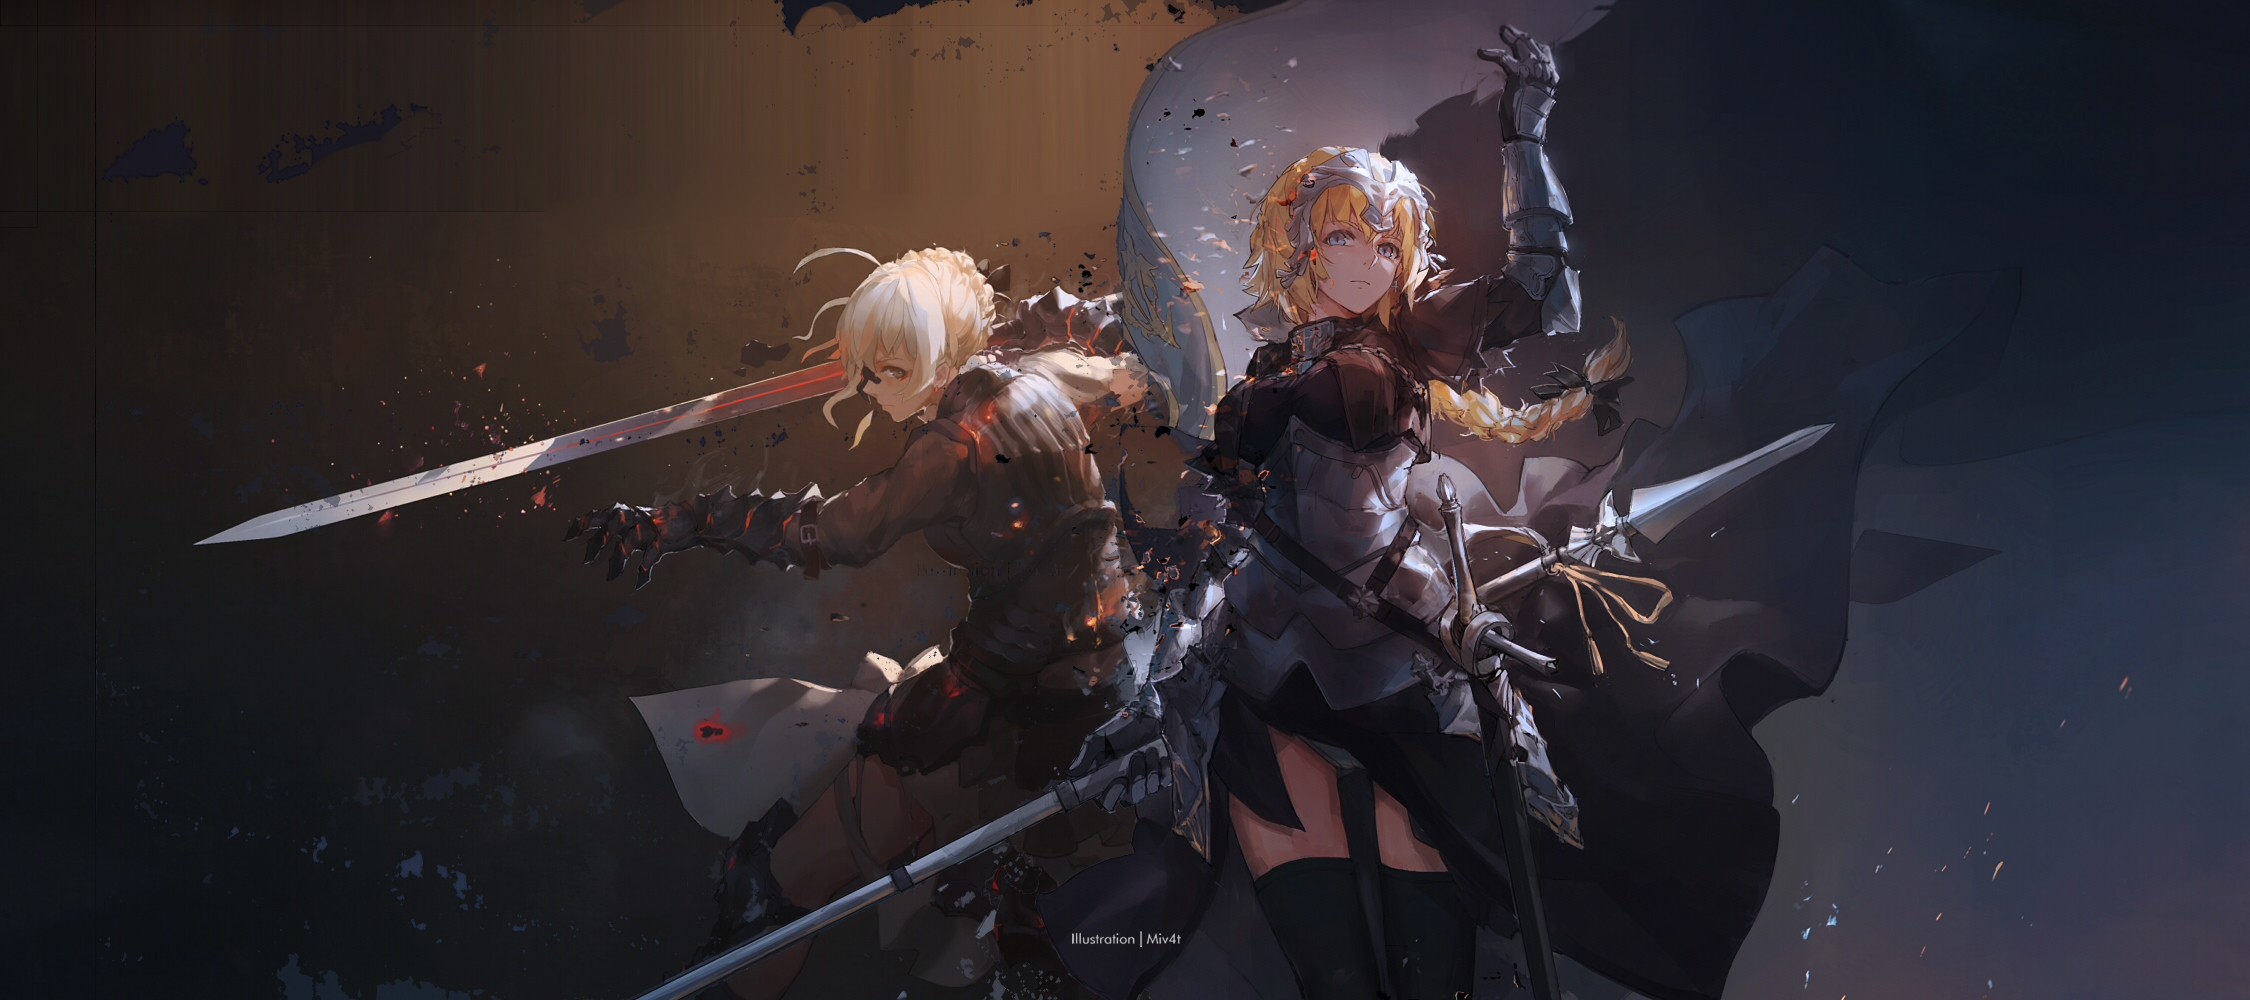 Anime 2250x1000 anime girls Saber Alter Fate series long hair armor Fate/Apocrypha  Fate/Grand Order Fate/Stay Night fate/stay night: heaven's feel 2D big boobs thighs black stockings female warrior Excalibur braided hair Miv4t green eyes blue eyes fighting Ruler (Fate/Apocrypha) Jeanne d'Arc (Fate) fan art spear sword blonde Artoria Pendragon